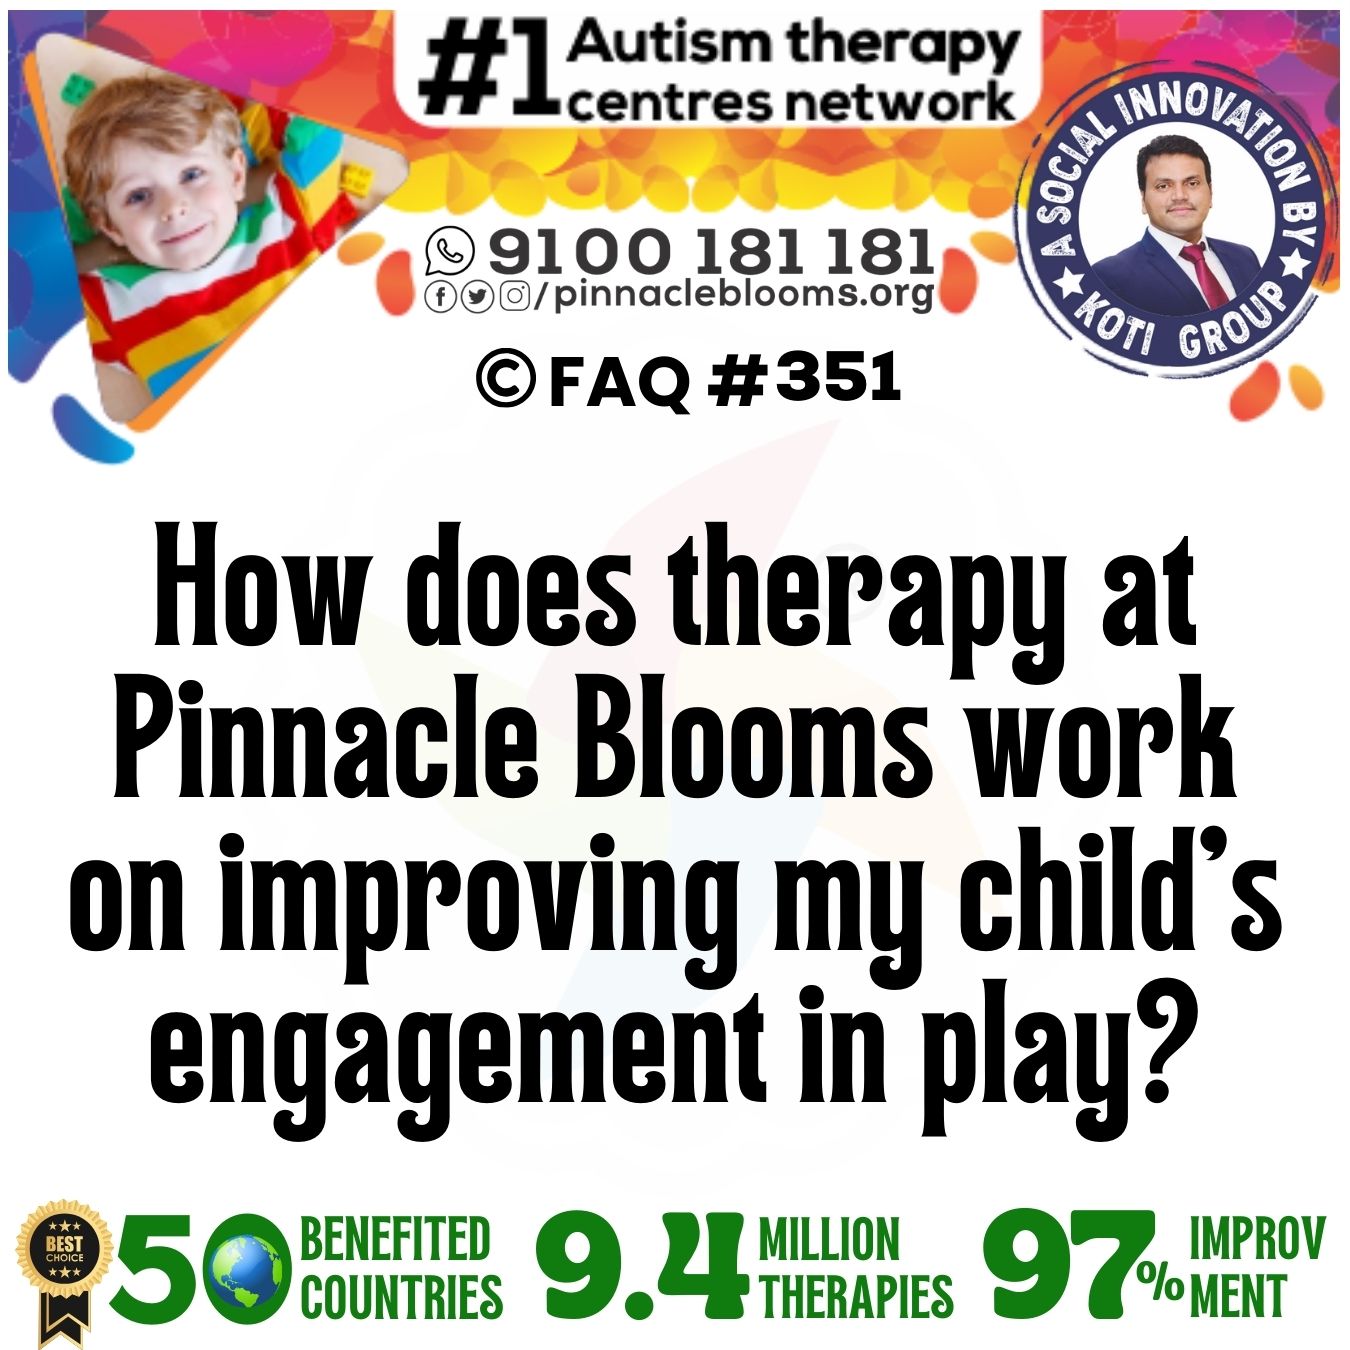 How does therapy at Pinnacle Blooms work on improving my child's engagement in play?